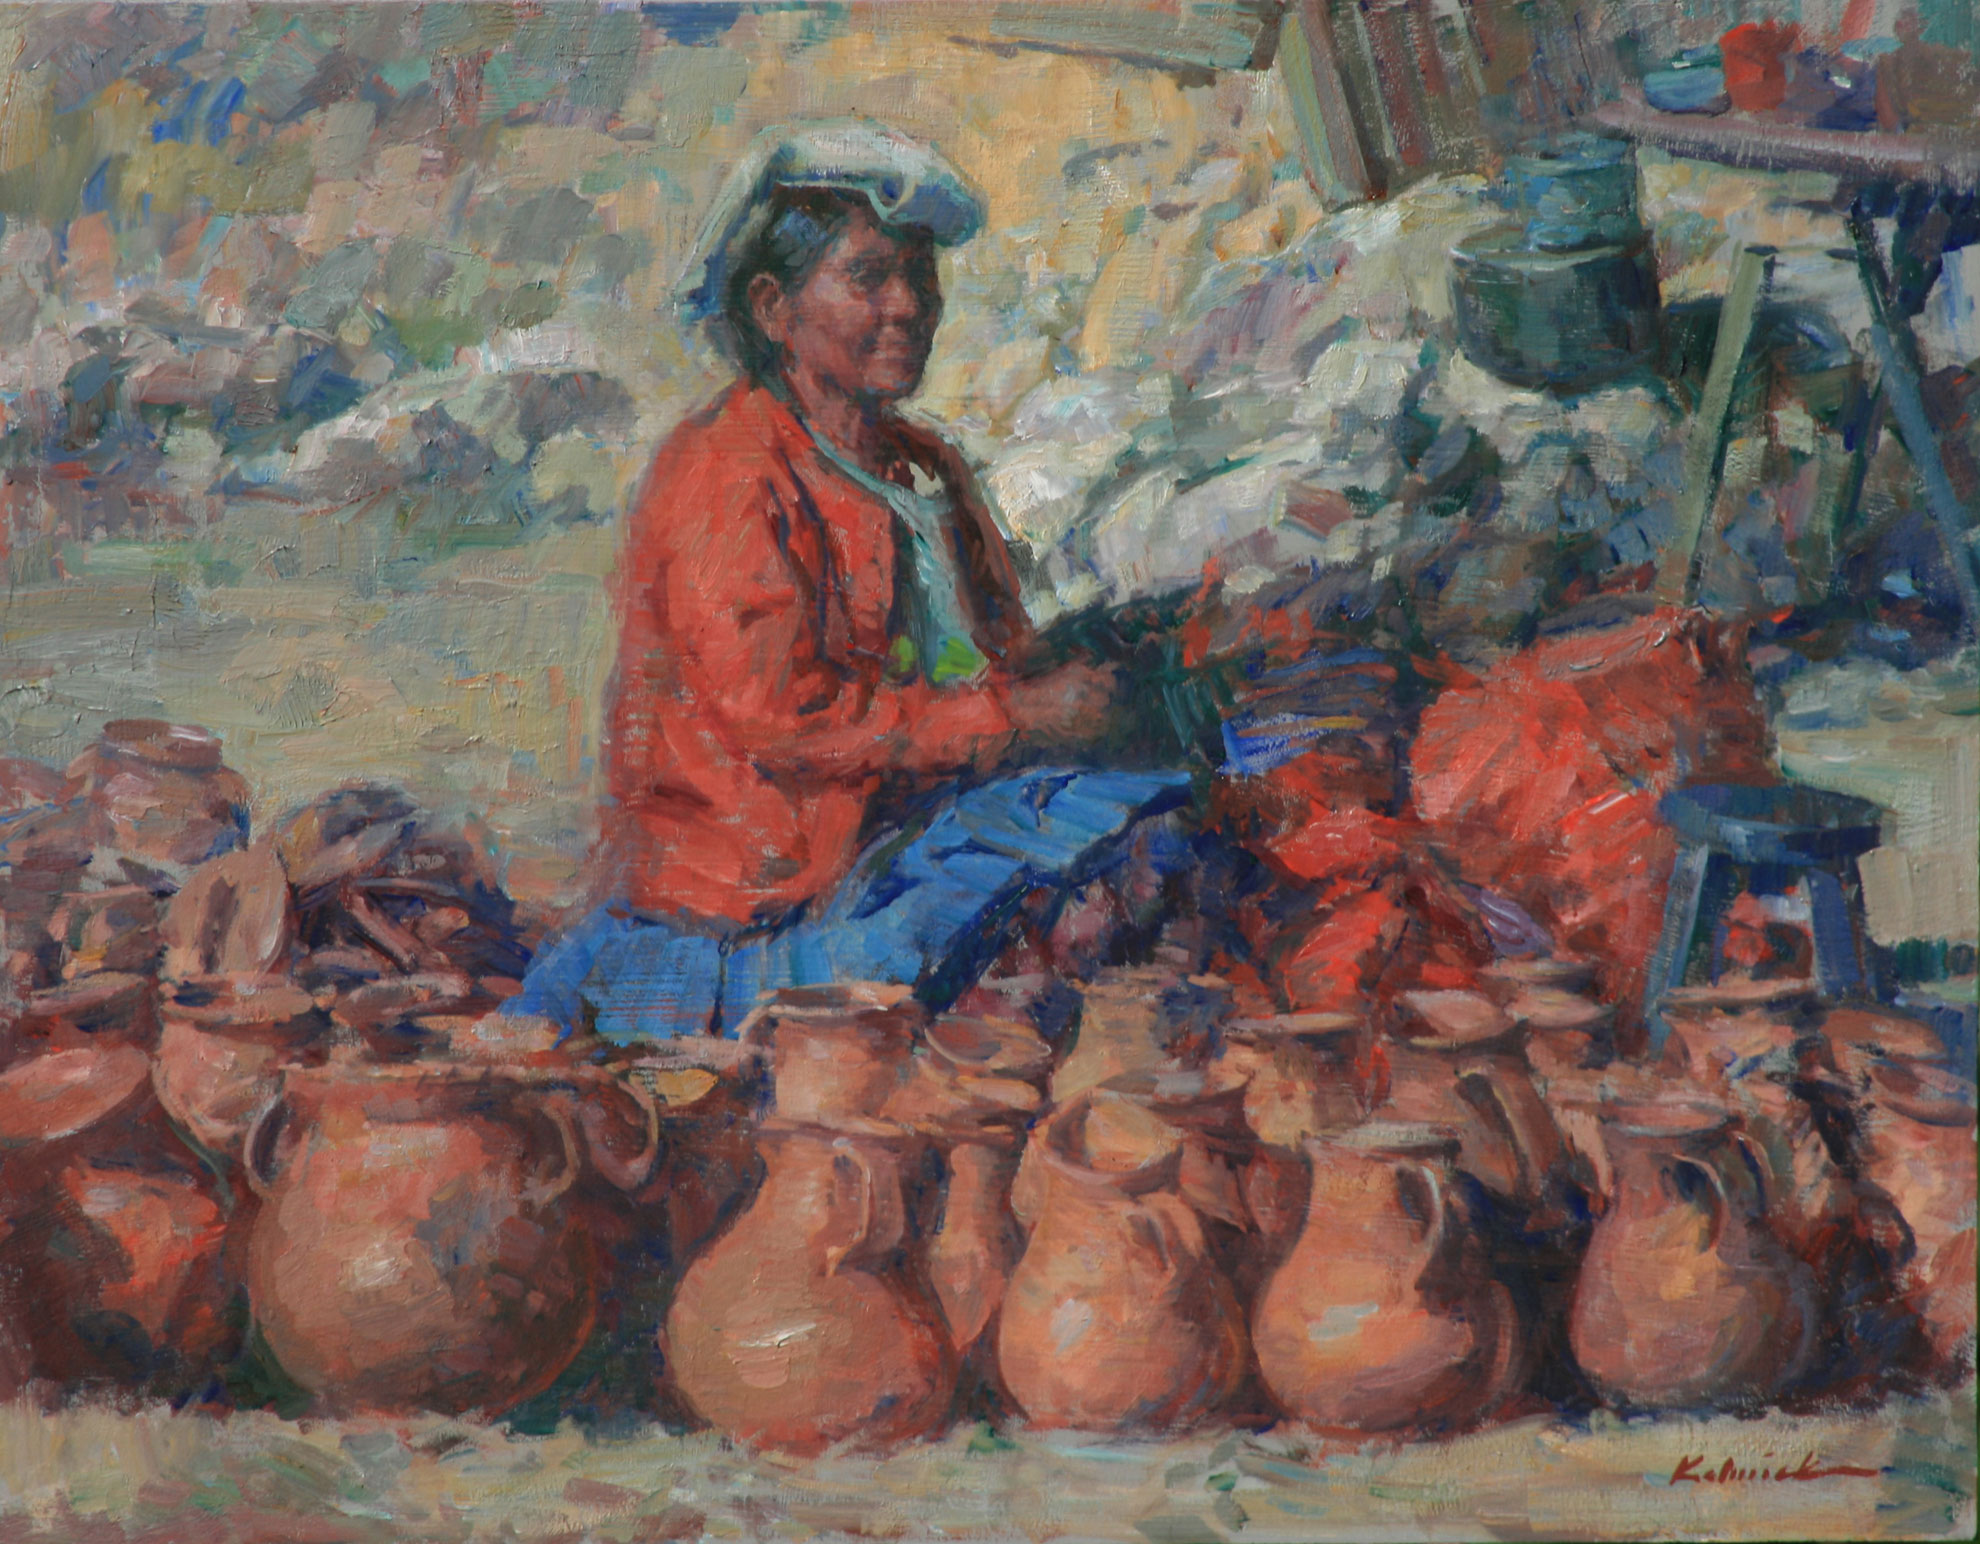 Pottery Seller, 14" x 18". Oil on canvas. Price US$3,200